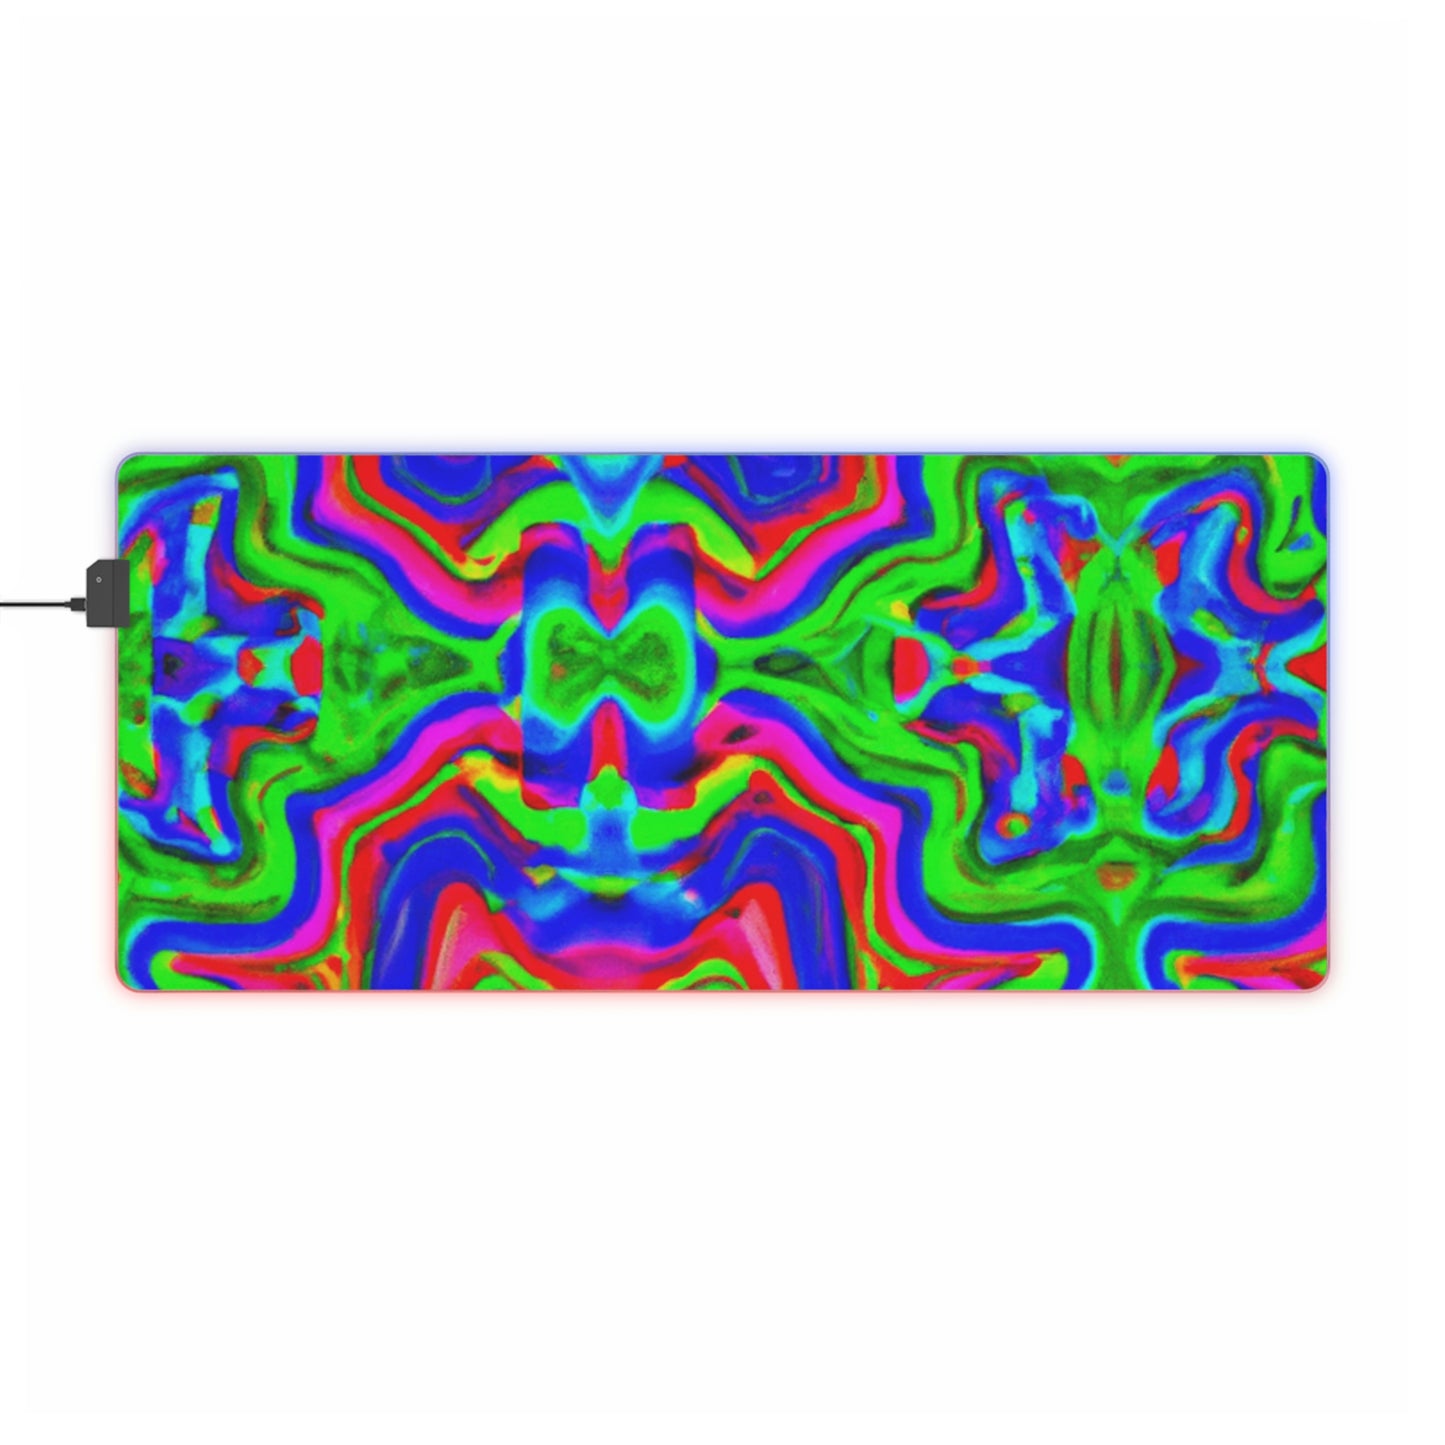 Rocket Roger - Psychedelic Trippy LED Light Up Gaming Mouse Pad